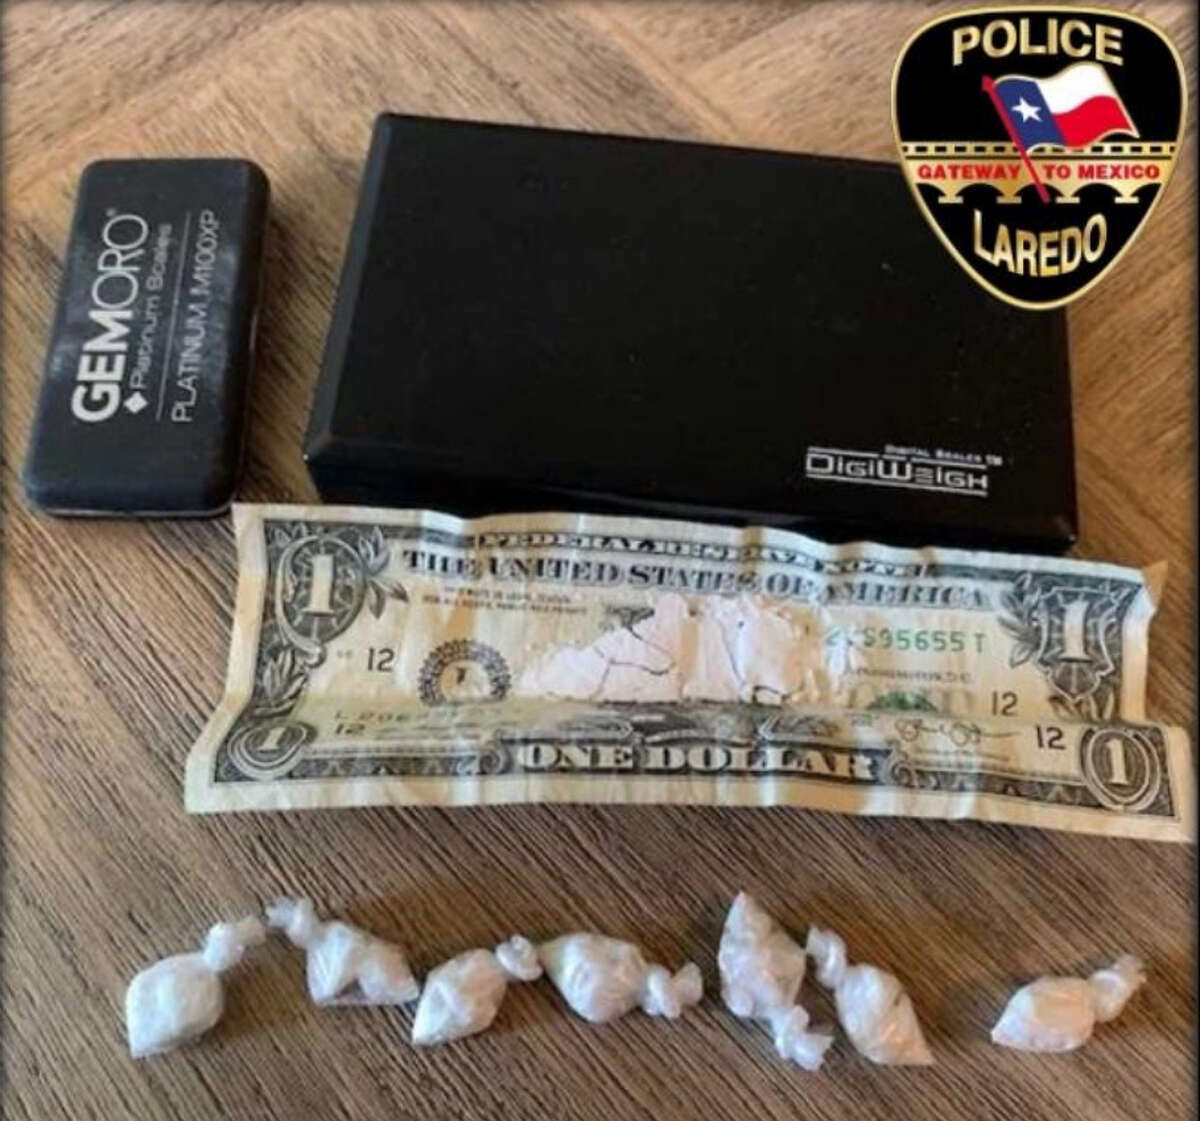 Shown is a dollar bill containing cocaine, seven plastic baggies containing cocaine and a digital scale.